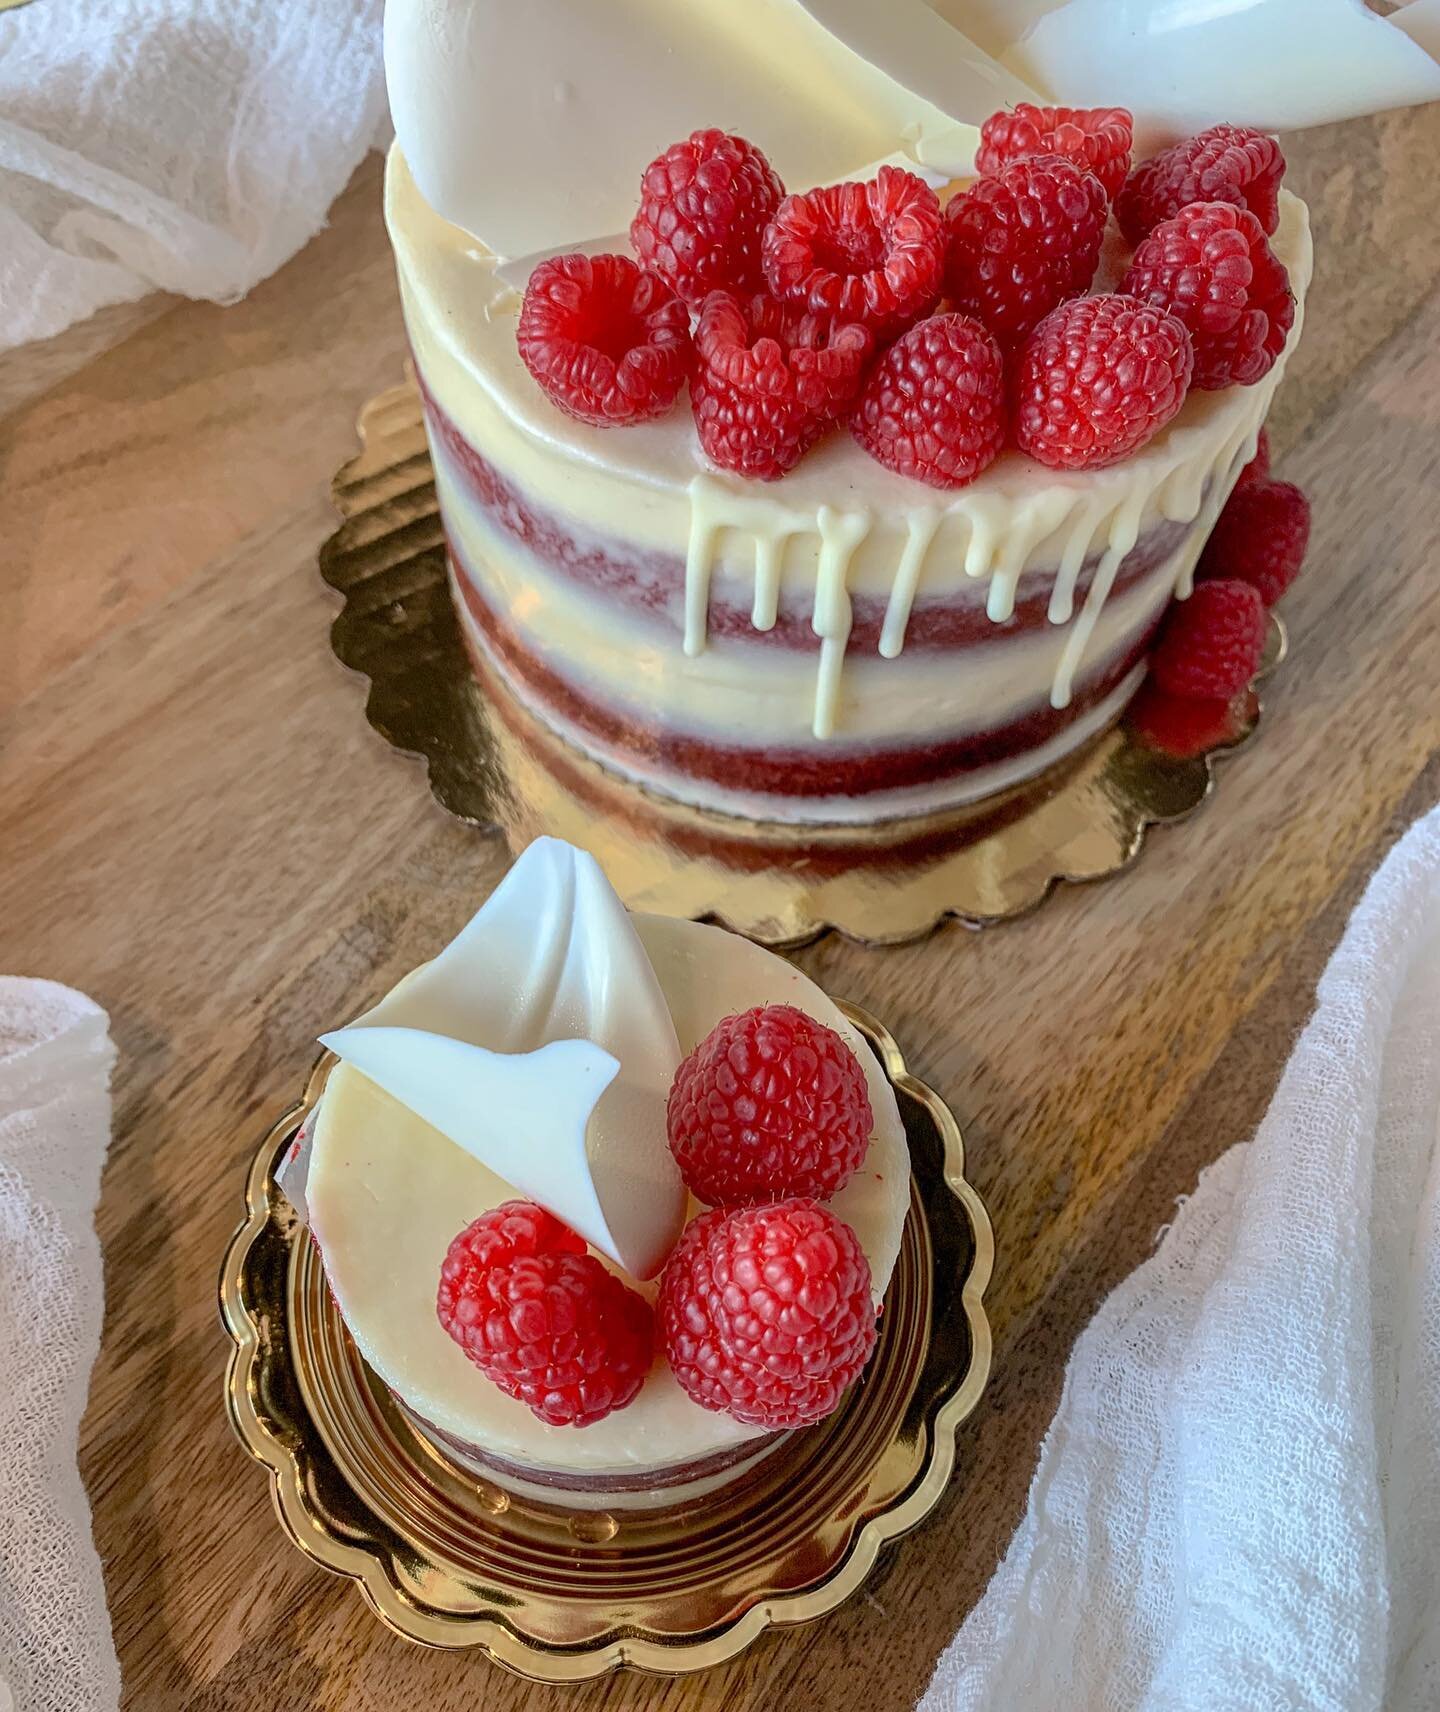 Around here, February means the yearly return of the beloved Red Velvet Cake. Indulge in classic scratch-made Red Velvet cake with subtly sweet cream cheese frosting topped with white chocolate fan and fresh raspberries. Just in time for Valentine&rs